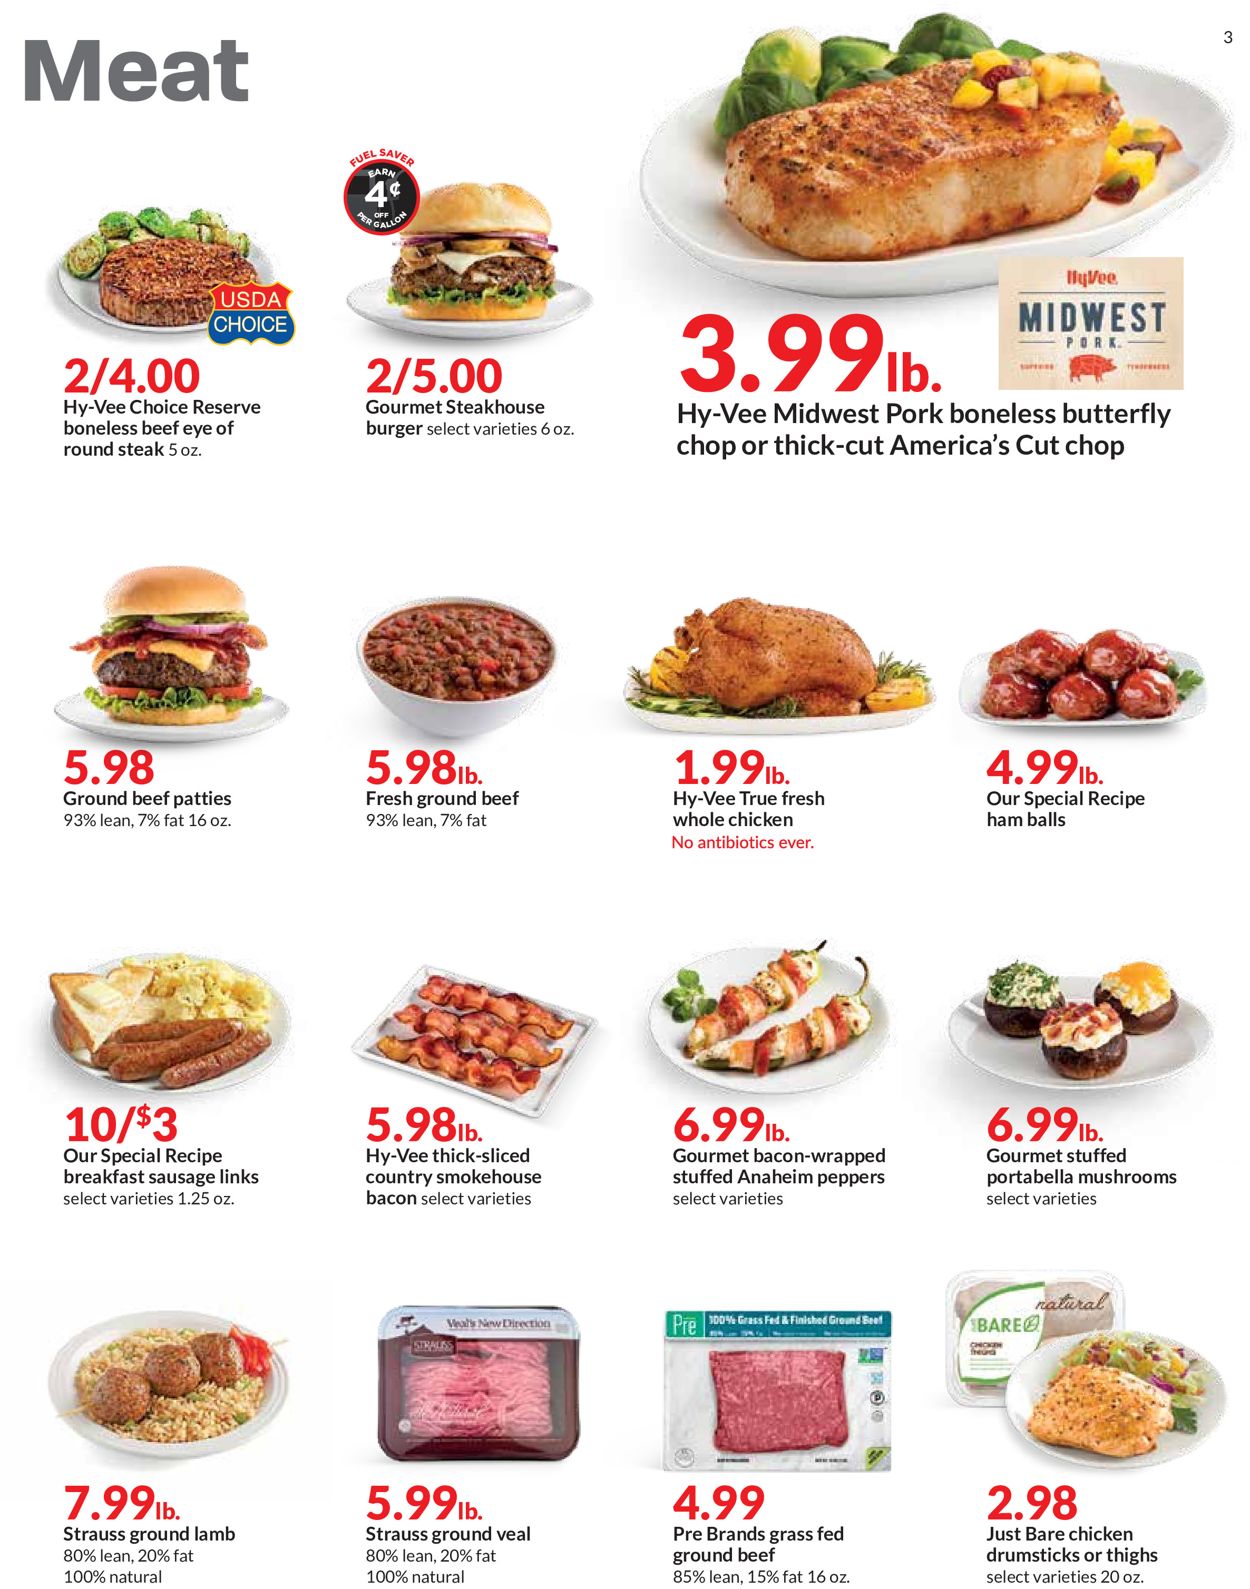 HyVee Current weekly ad 11/11 - 11/17/2020 [3] - frequent-ads.com